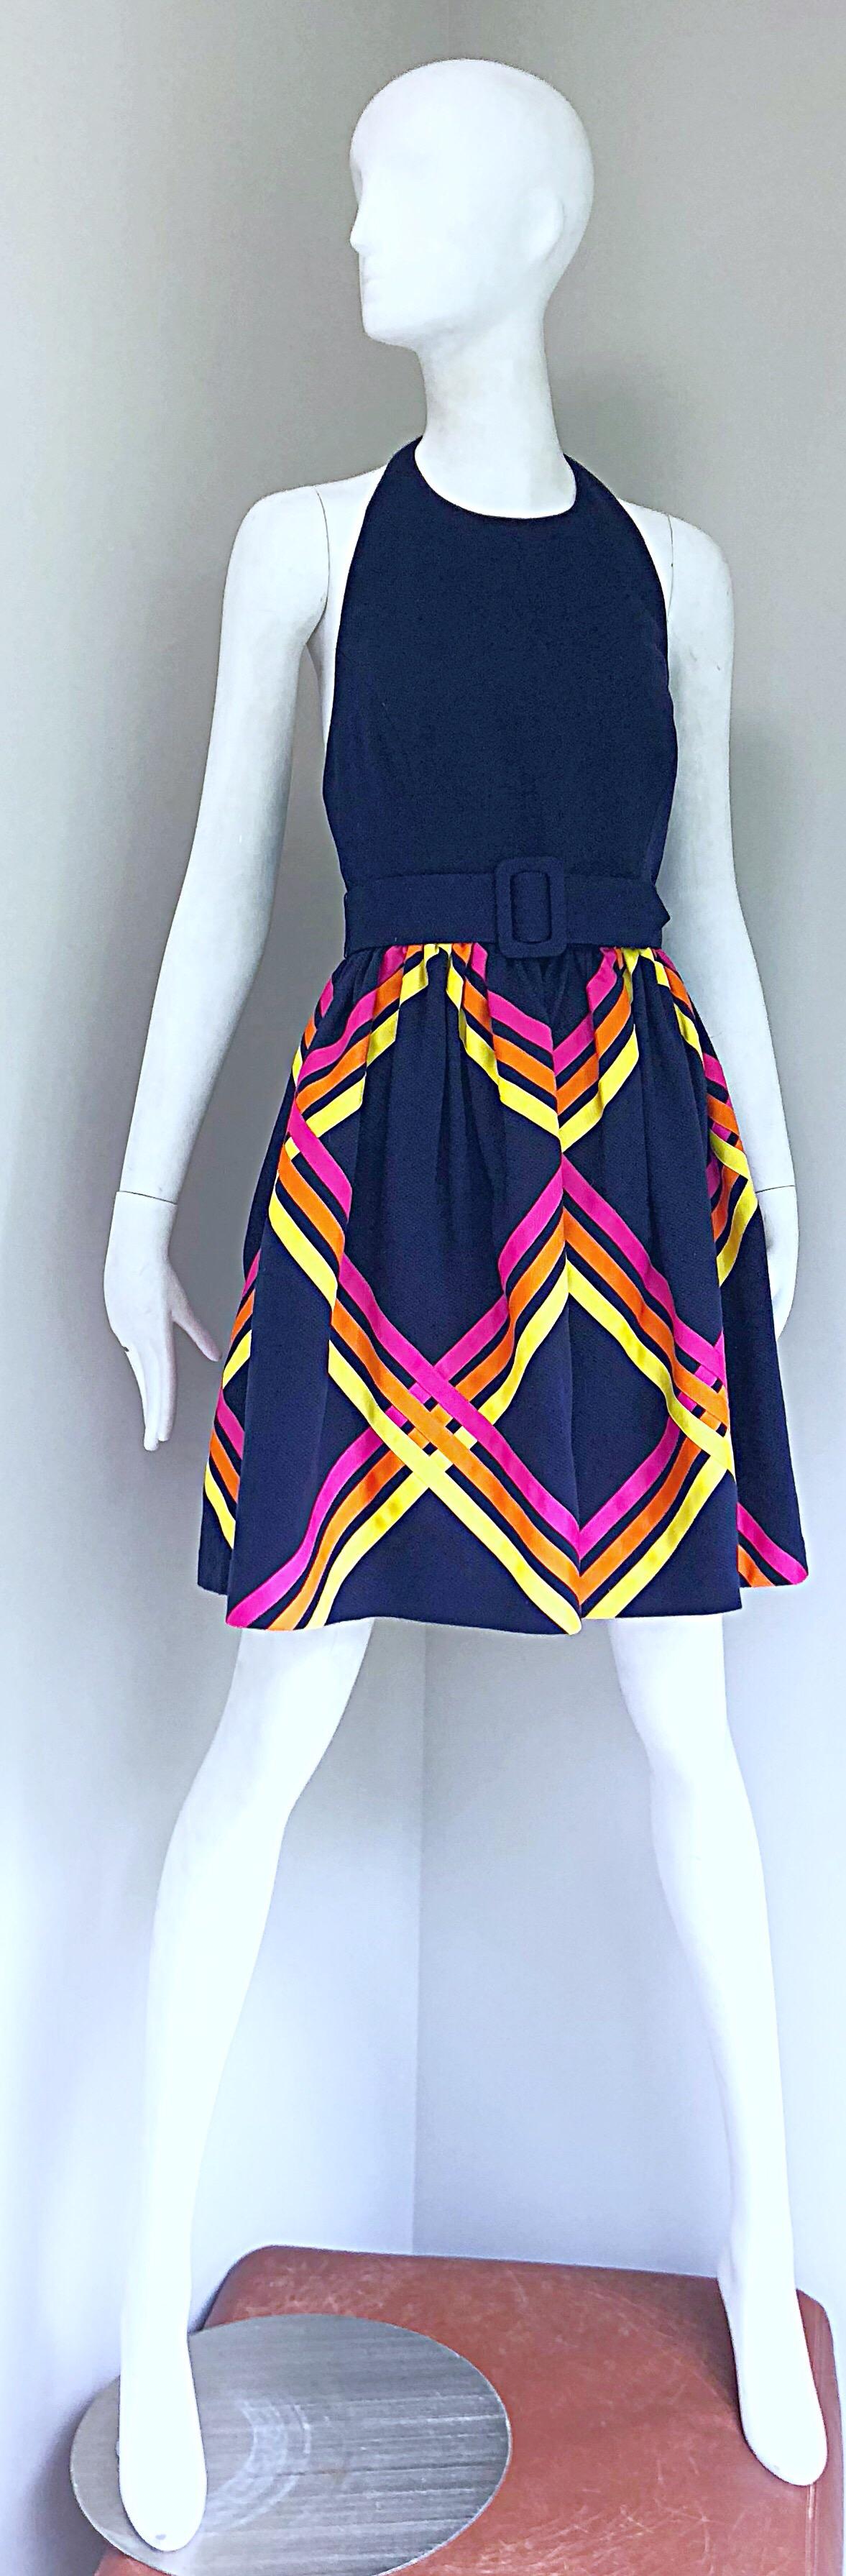 Chic new with tags deadstock BILL BLASS navy blue belted 
A-Line cotton pique halter dress! Features a fitted bodice, with a full forgiving and flattering A-Line skirt. Hot pink, orange and yellow grosgrain ribbon detail on the front and back of the